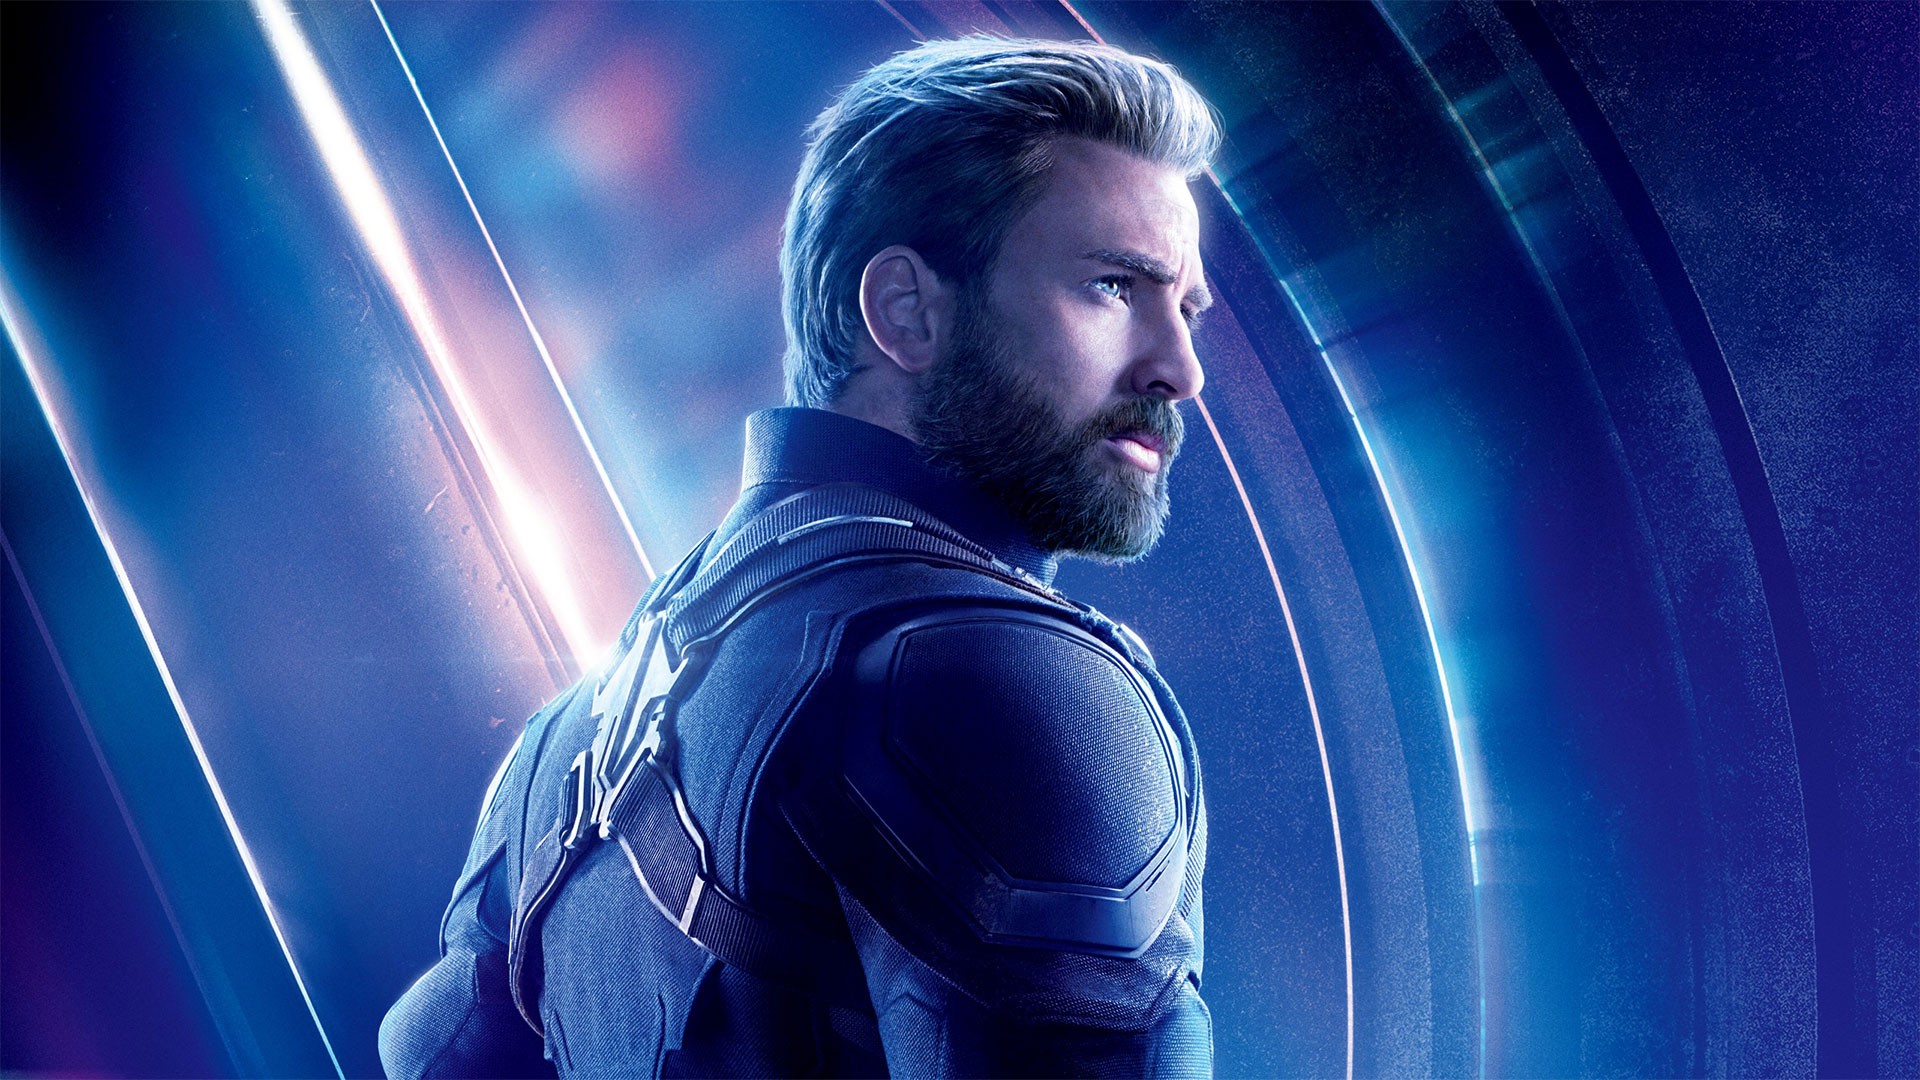 Chris Evans Captain America Avengers Endgame Wallpaper HD with high-resolution 1920x1080 pixel. You can use this poster wallpaper for your Desktop Computers, Mac Screensavers, Windows Backgrounds, iPhone Wallpapers, Tablet or Android Lock screen and another Mobile device